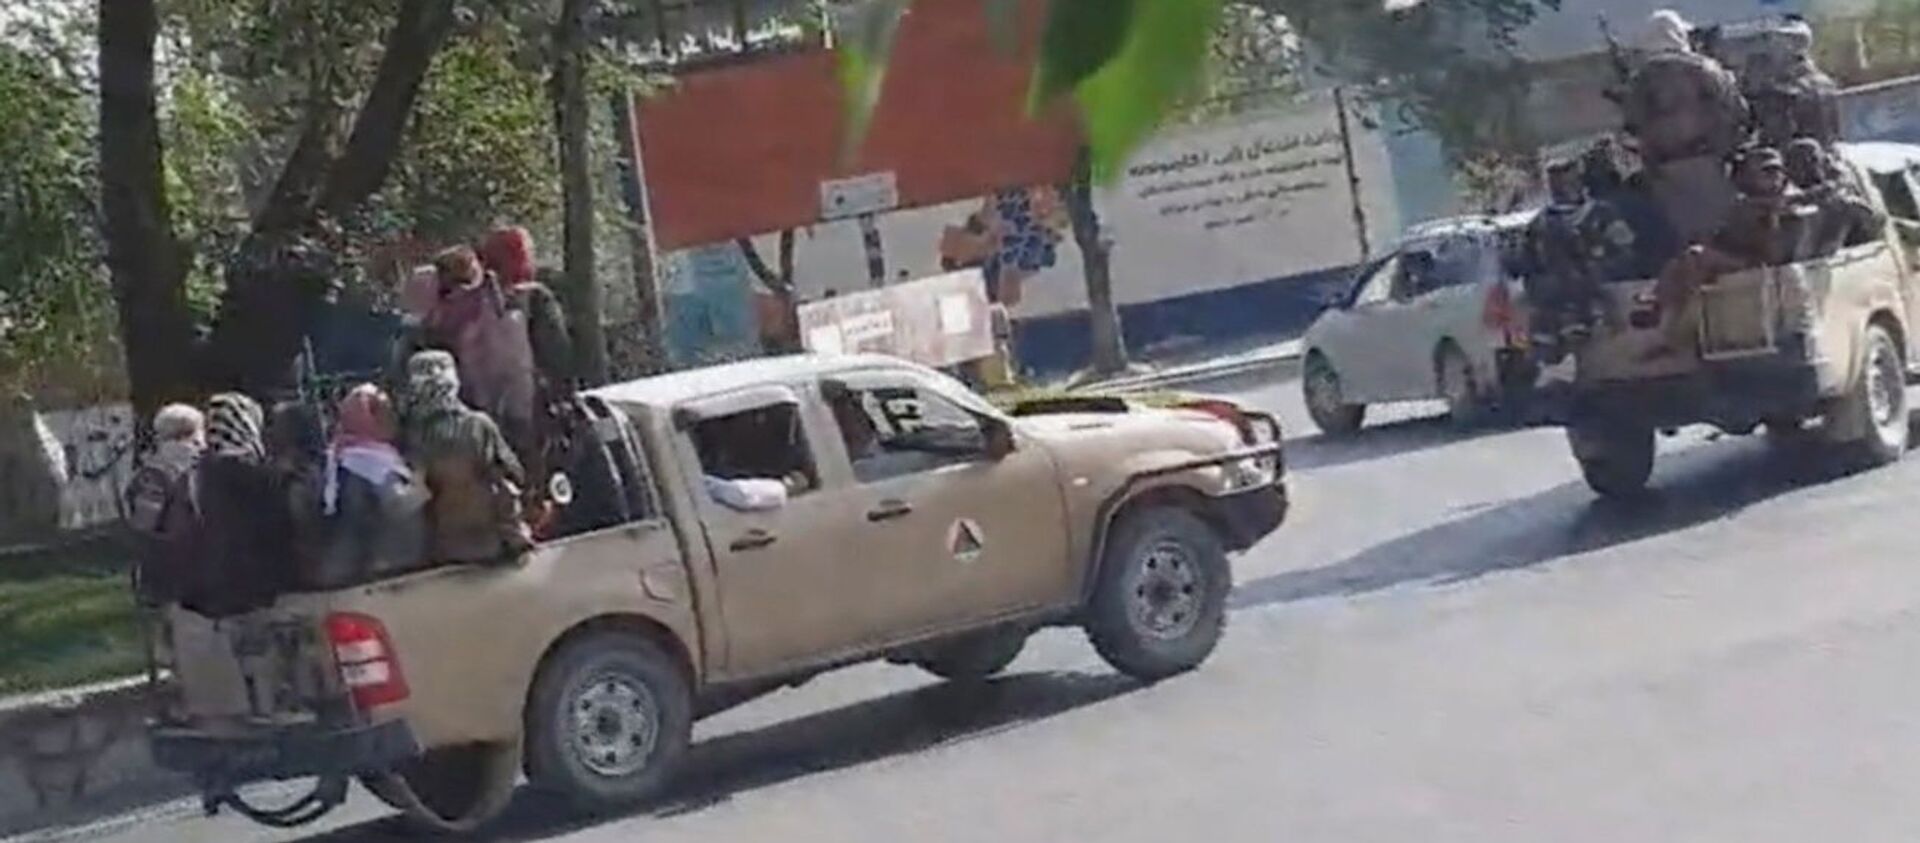 Taliban drive through the streets of Kabul, Afghanistan August 16, 2021 in this still image taken from social media video.  - Sputnik International, 1920, 16.08.2021